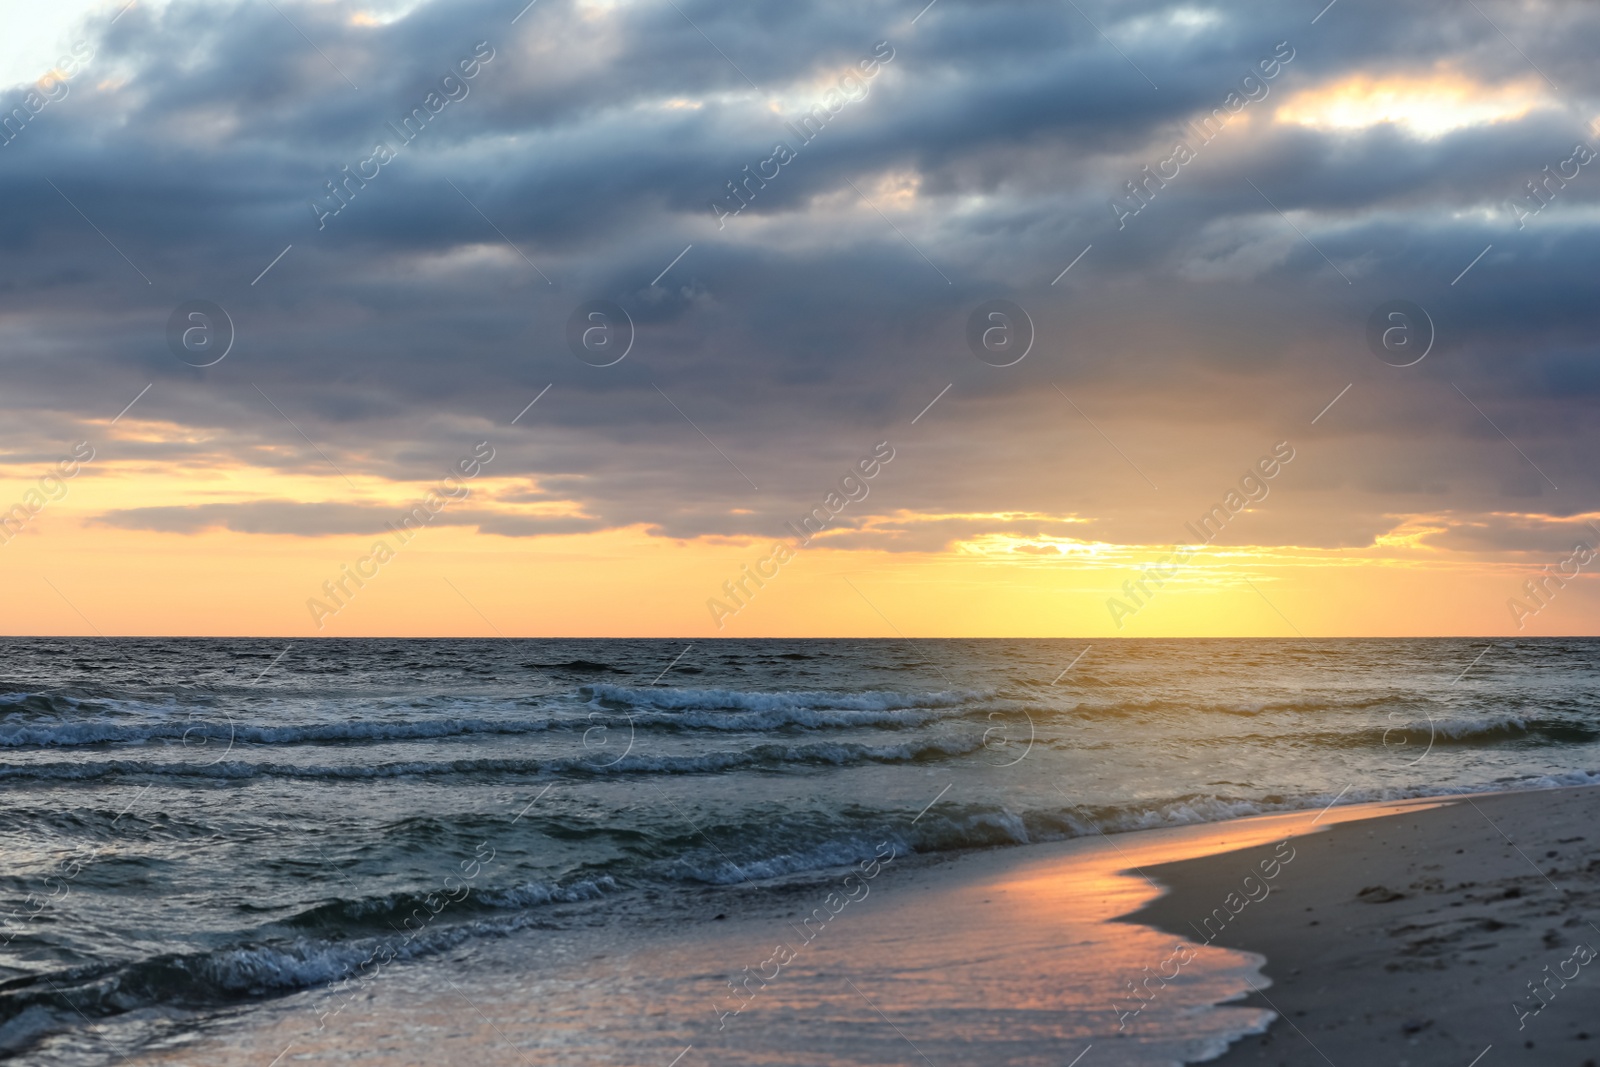 Photo of Picturesque view of beautiful sky with clouds over tropical beach at sunset